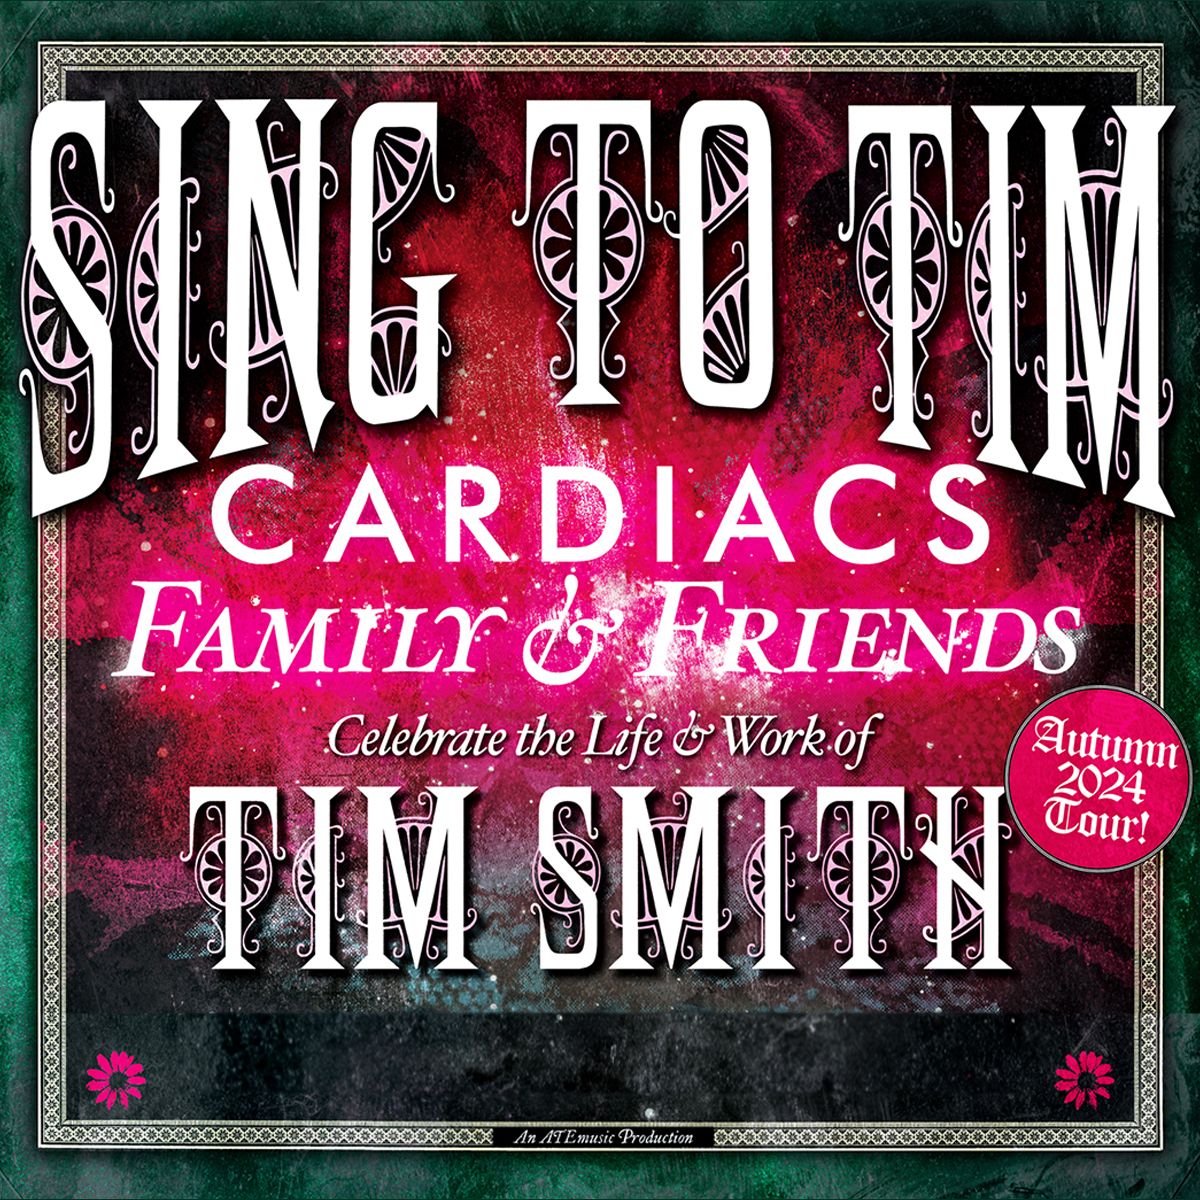 💥💥 Now On Sale 💥💥 Tickets for Cardiacs Family & Friends - Sing To Tim, are now on sale. This show will be celebrating the life & works of Tim Smith. Sunday 13th October 7:30pm Tickets available from concorde2.co.uk